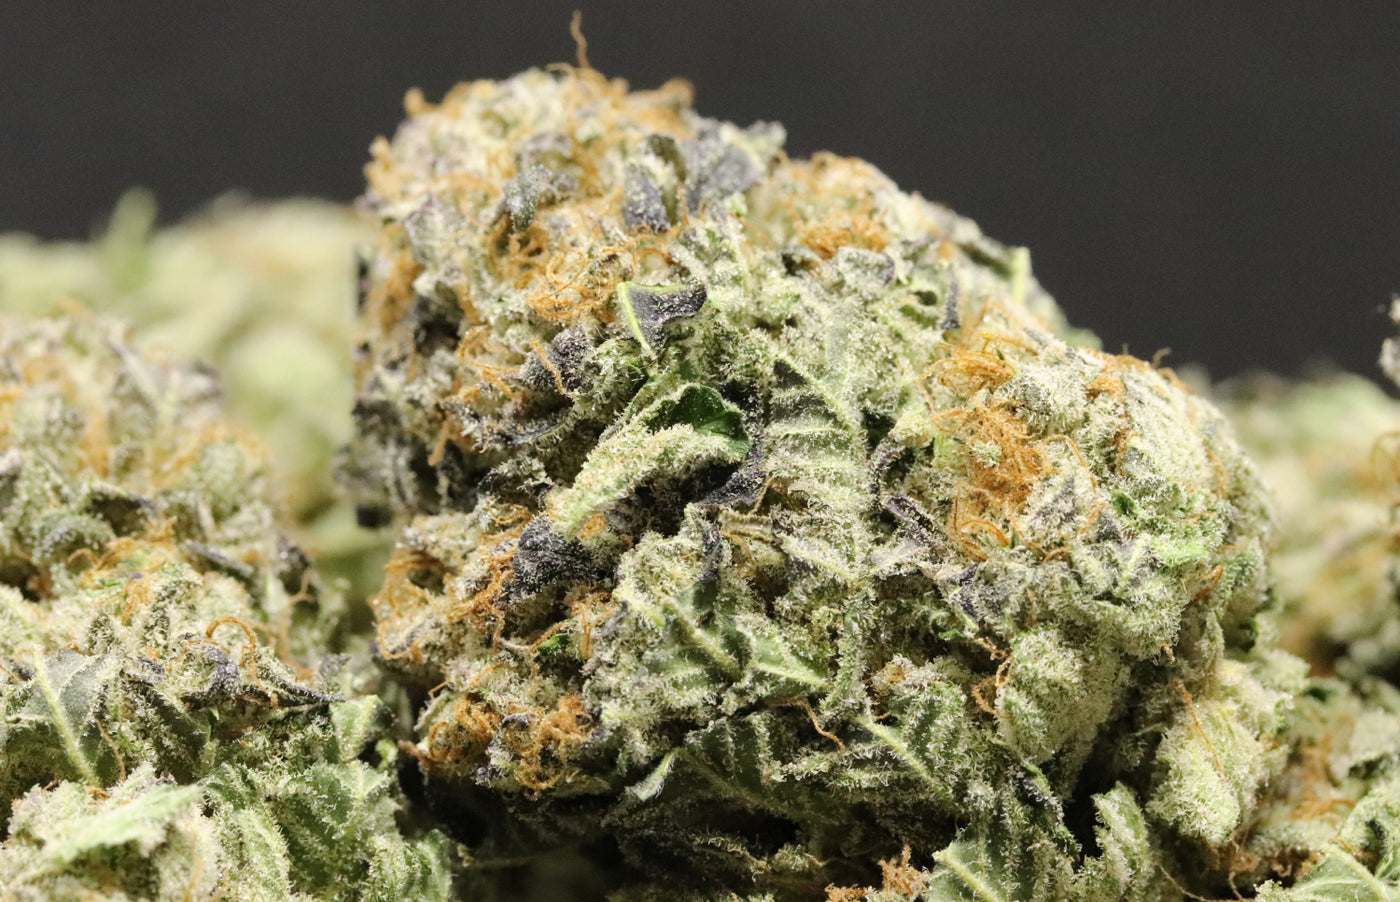 Is pineapple express indica or sativa? Strain information